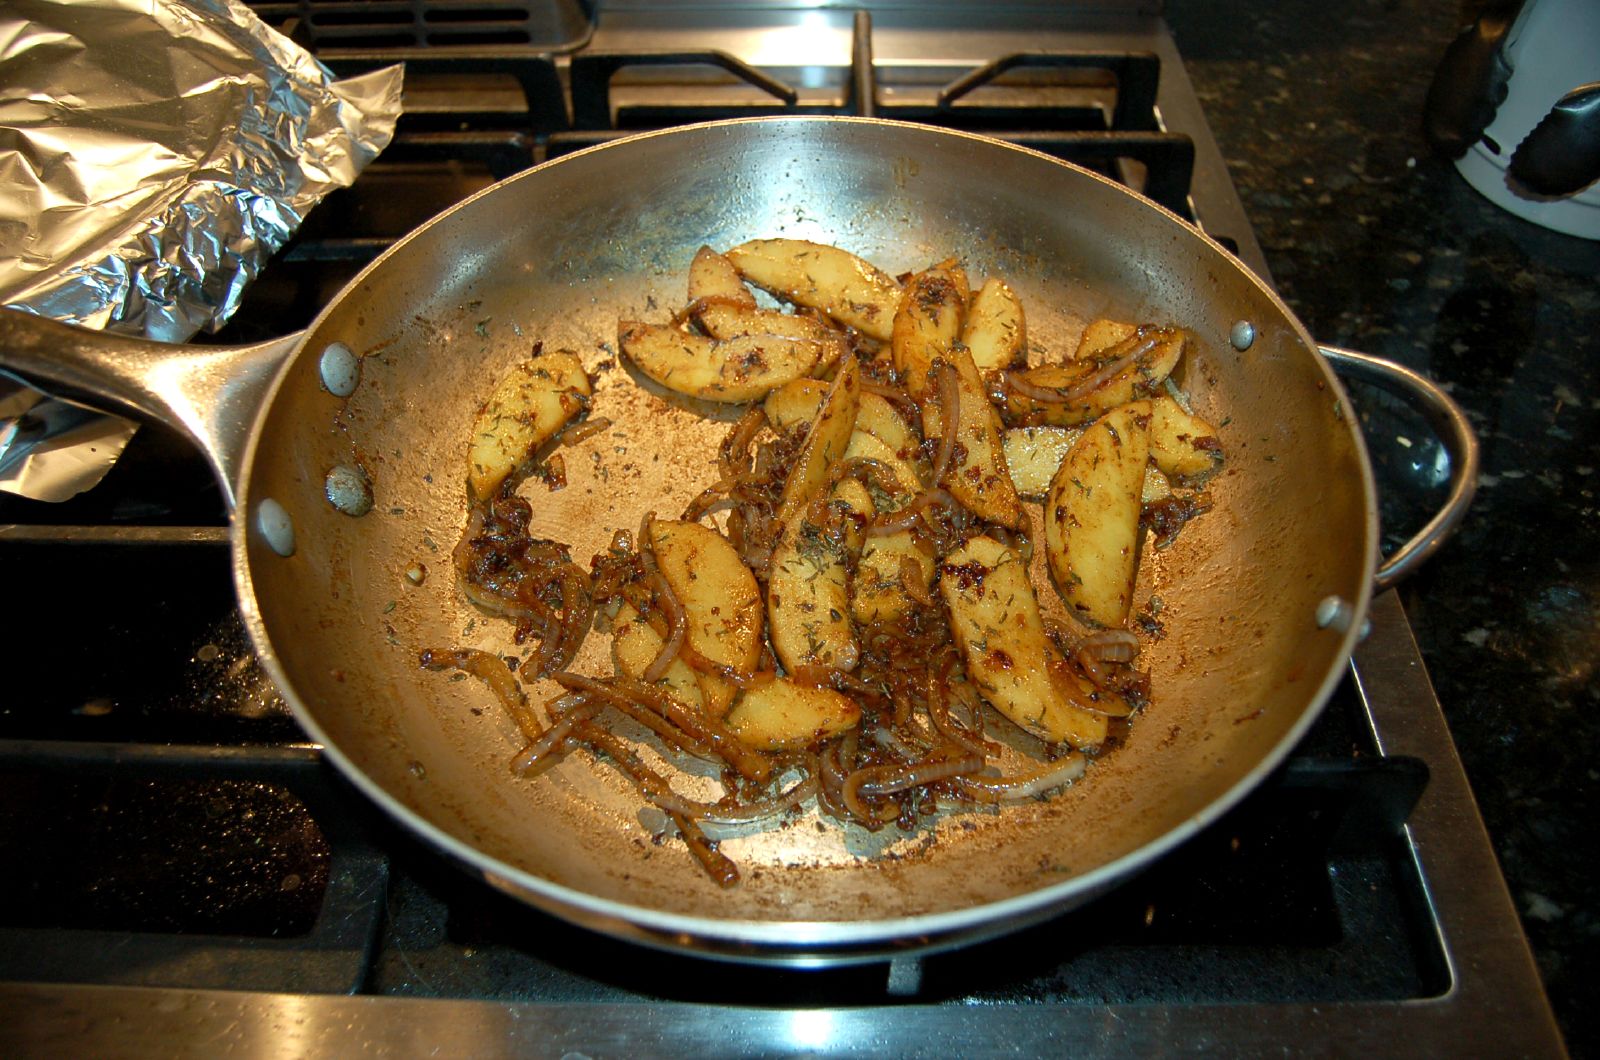 there are potatoes in the frying pan on the stove